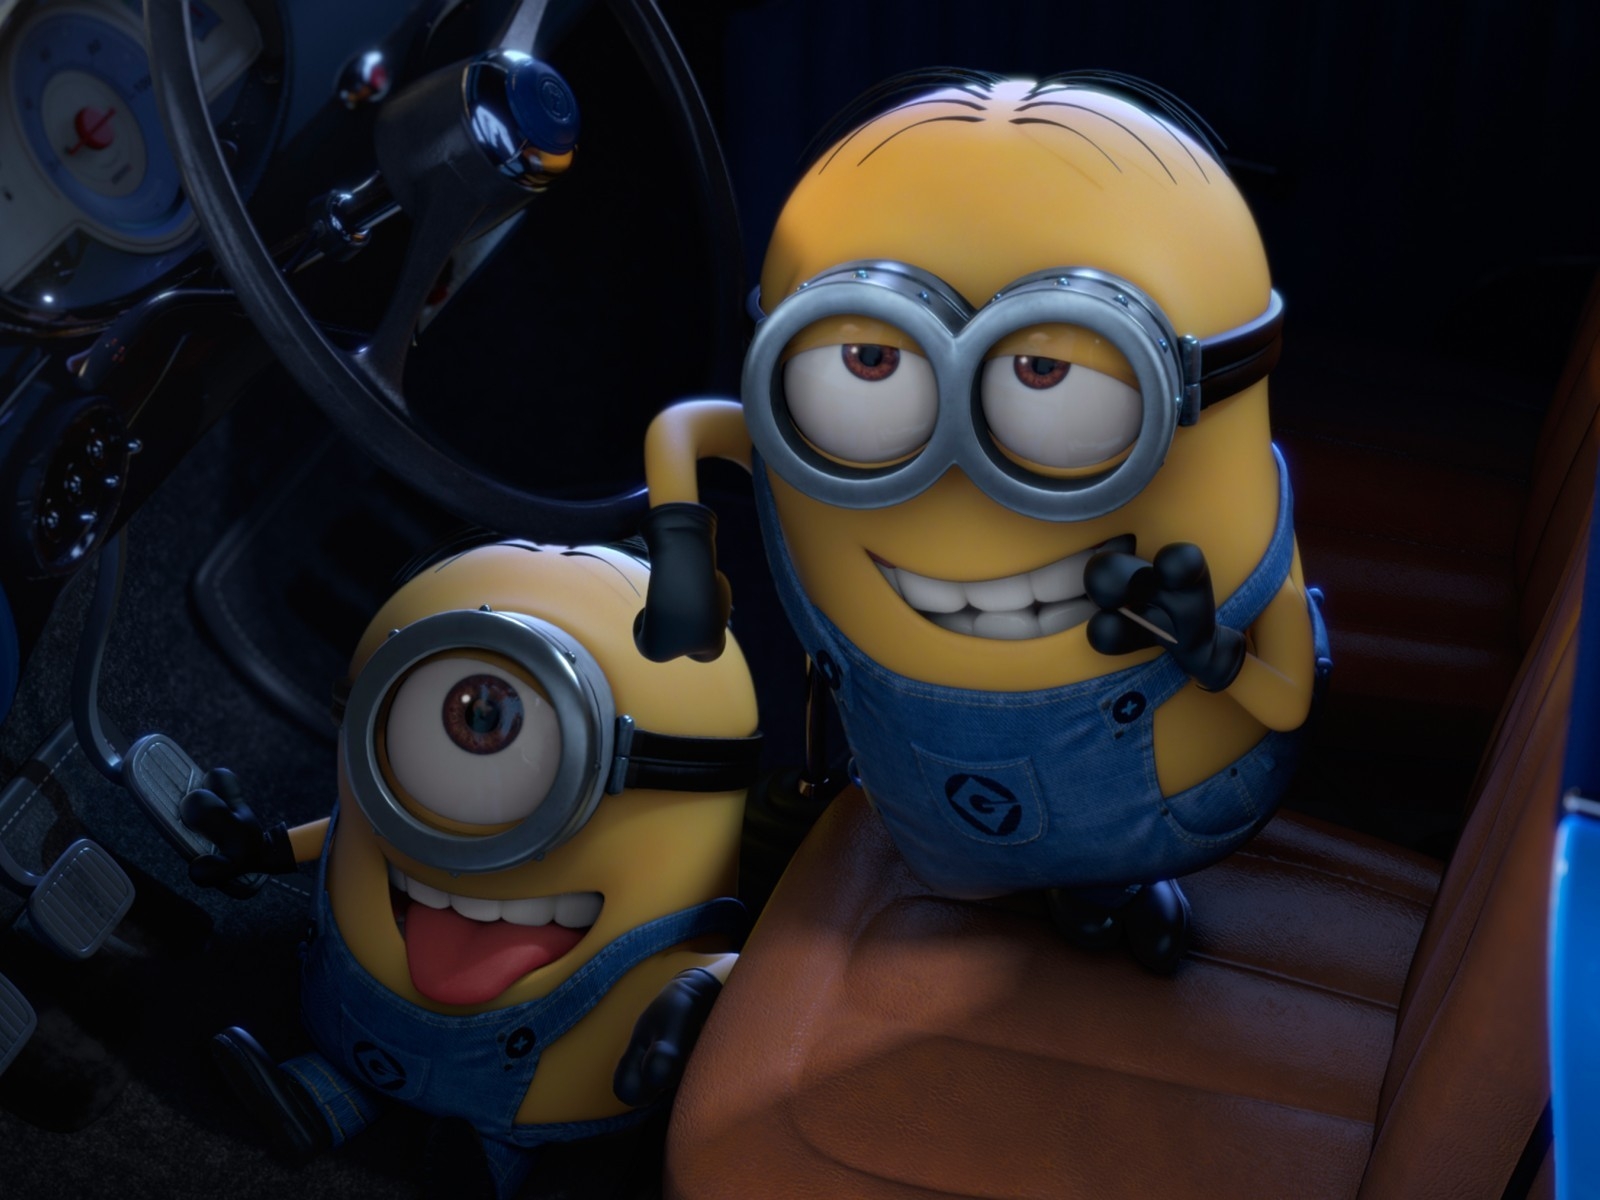 Despicable Me 2 Smile for 1600 x 1200 resolution